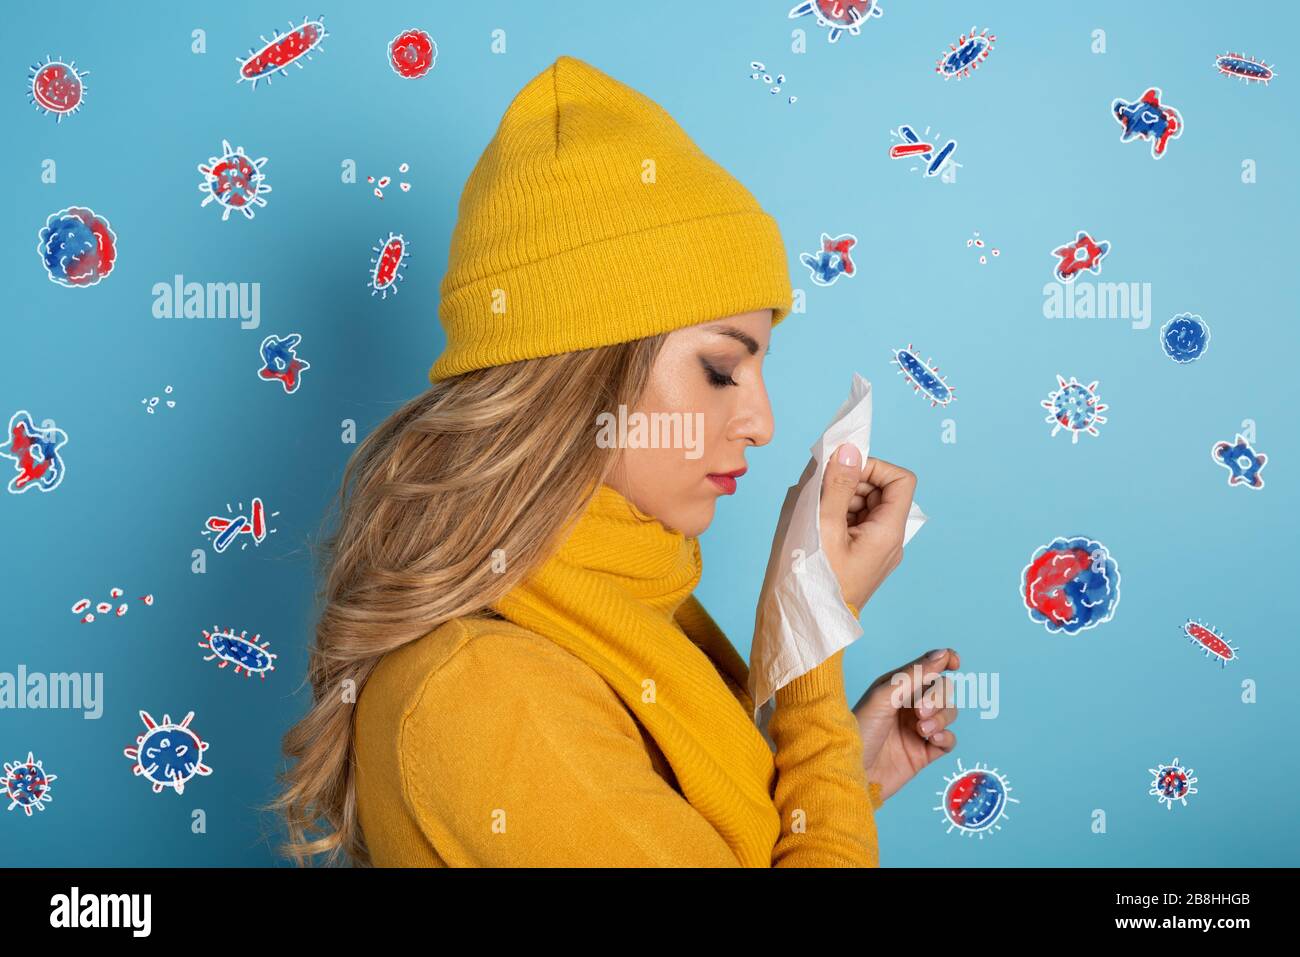 Girl caught a cold and is surrounded by viruses and bacteria. Studio on Cyan background Stock Photo